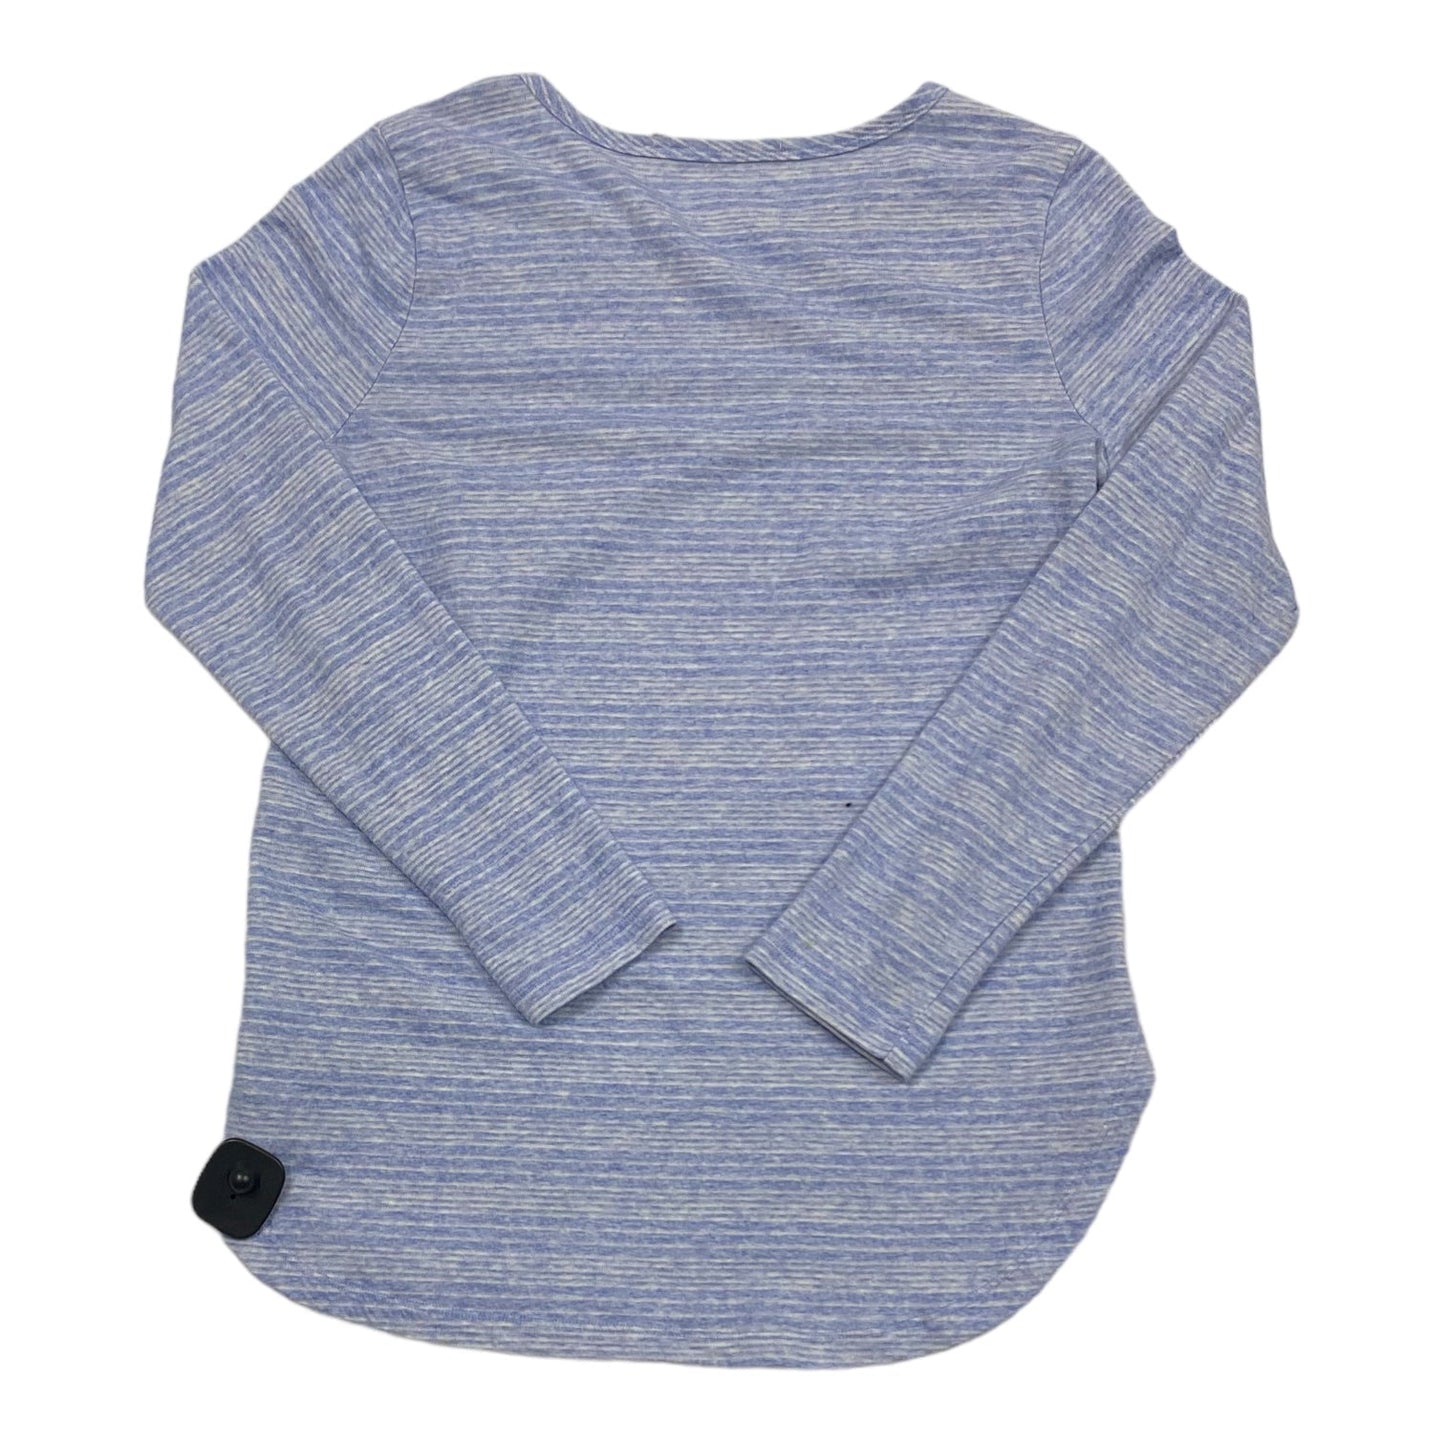 Blue Top 3/4 Sleeve Soft Surroundings, Size S